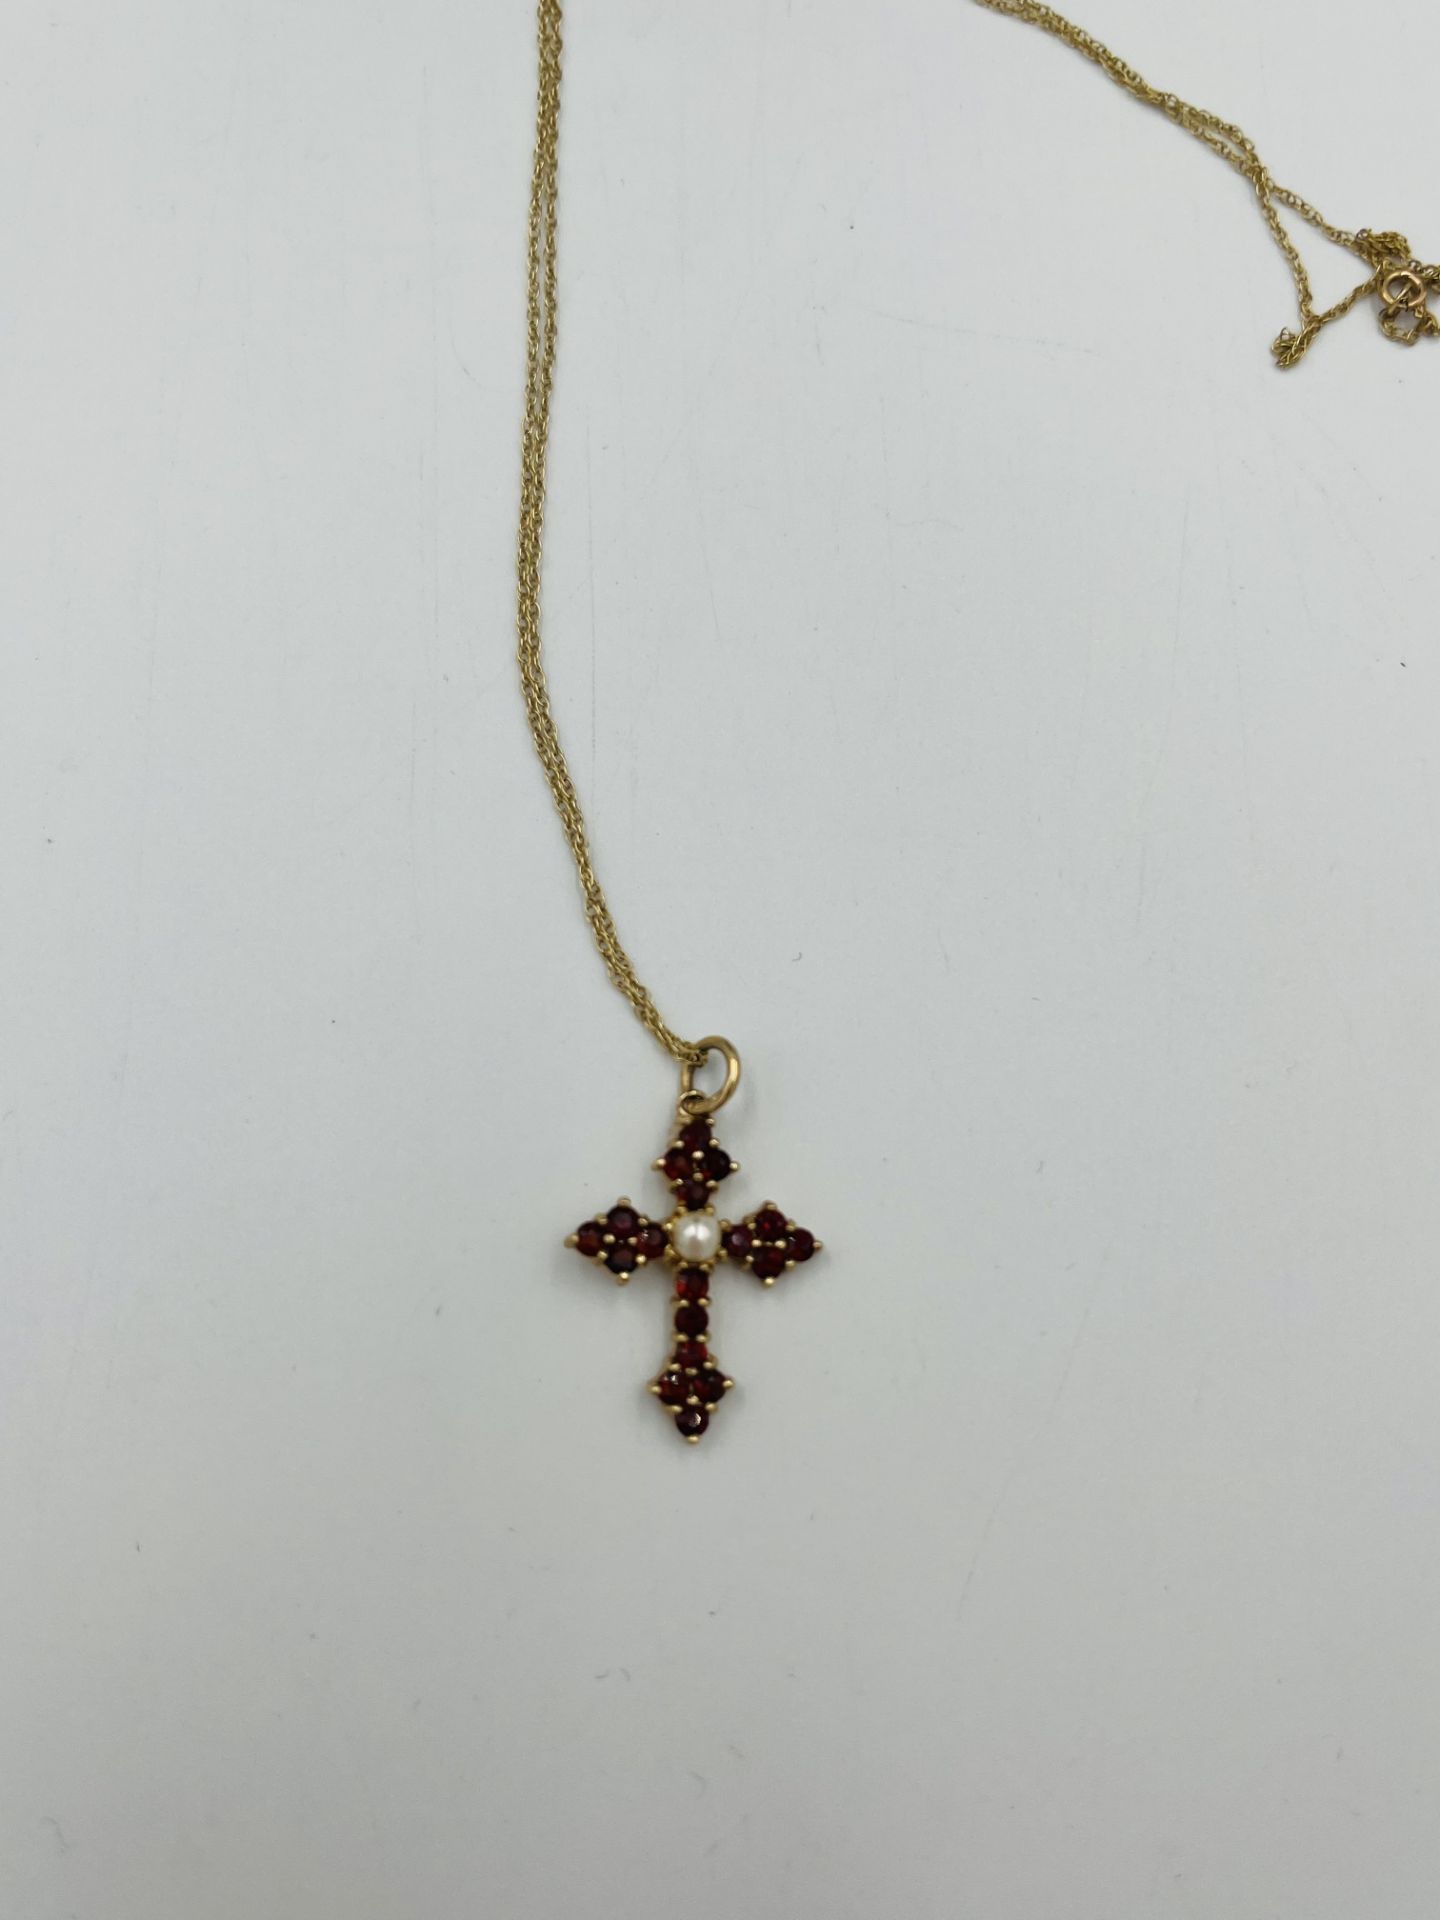 9ct gold cross - Image 5 of 6